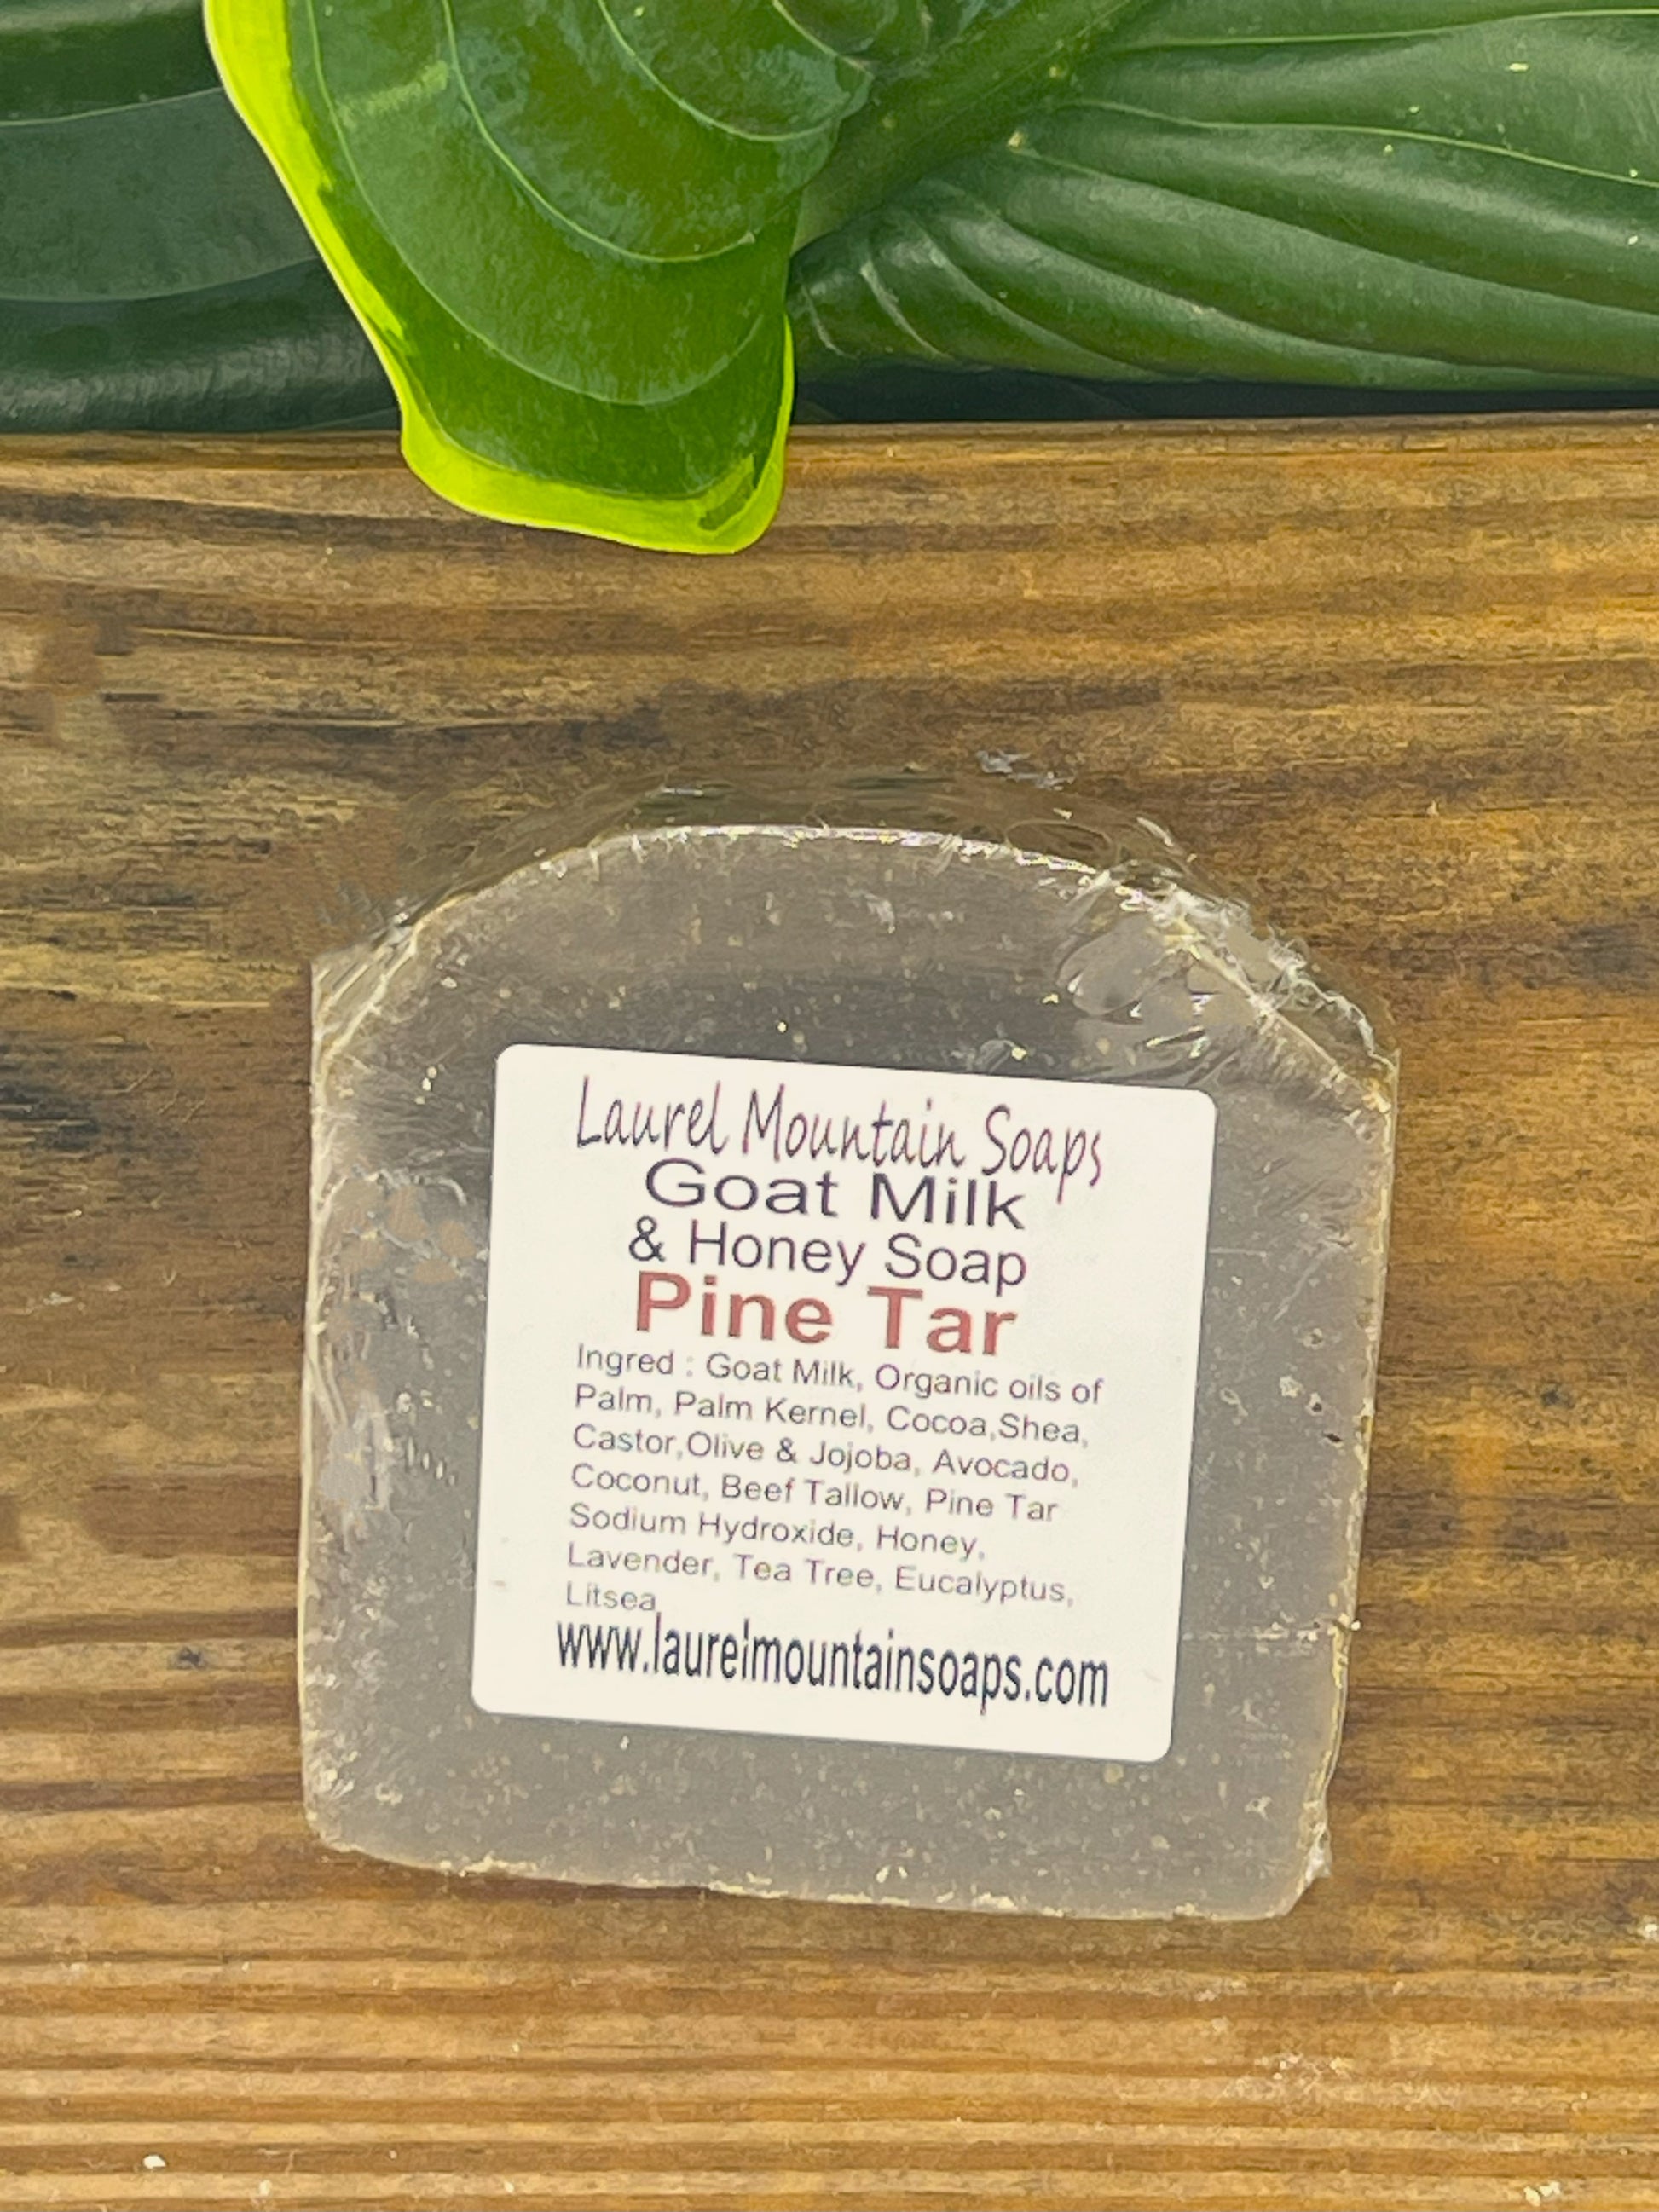 What is Pine Tar, and why do we use it in our soaps?